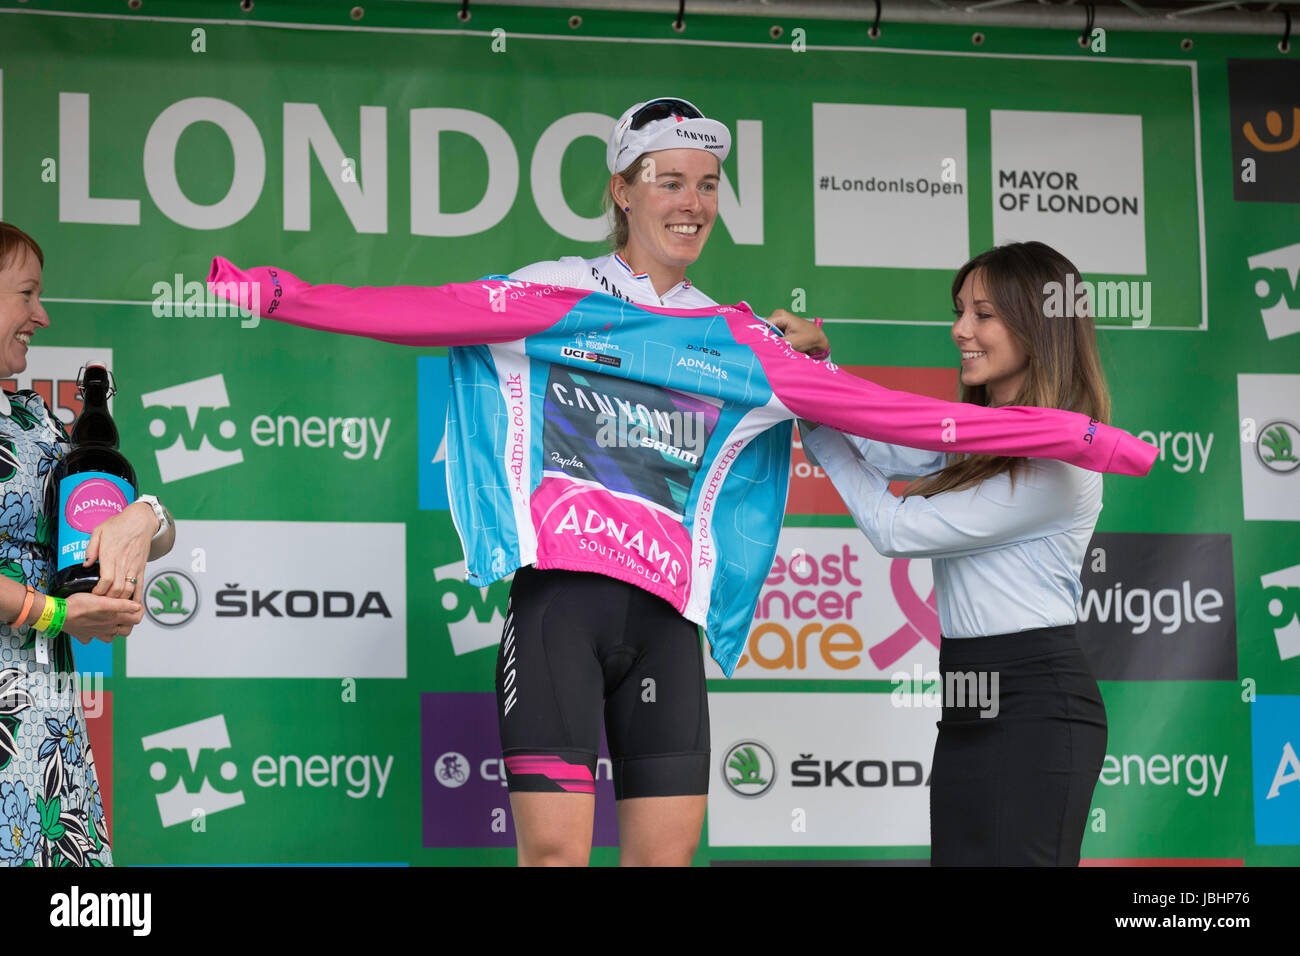 London, UK.  11th June 2017. Final stage of the 2017 Women’s Tour of Britain. Hannah Barnes wins the jersey for the most combatitive ride of the stage. Credit: Neville Styles/Alamy Live News Stock Photo